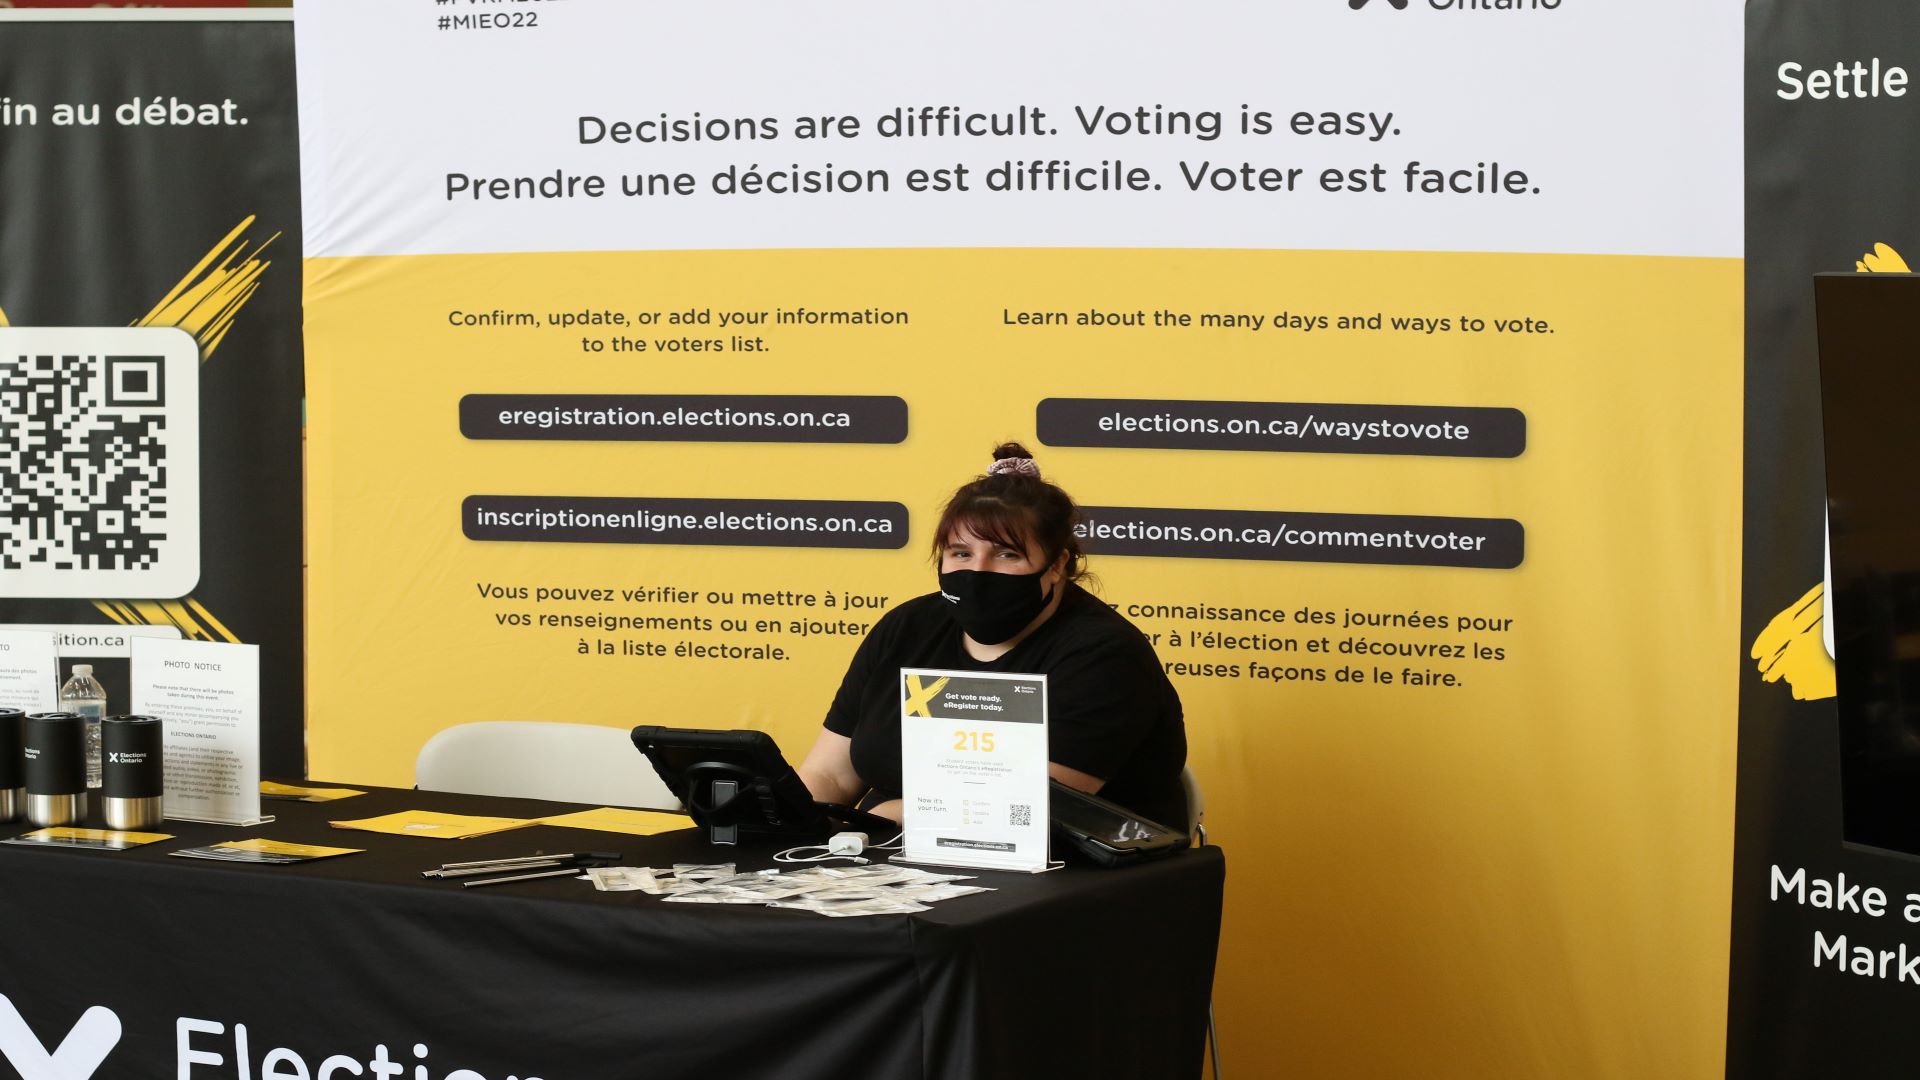 Samantha Ranger, a host, sits at the Student Commons voting booth at Algonquin College.